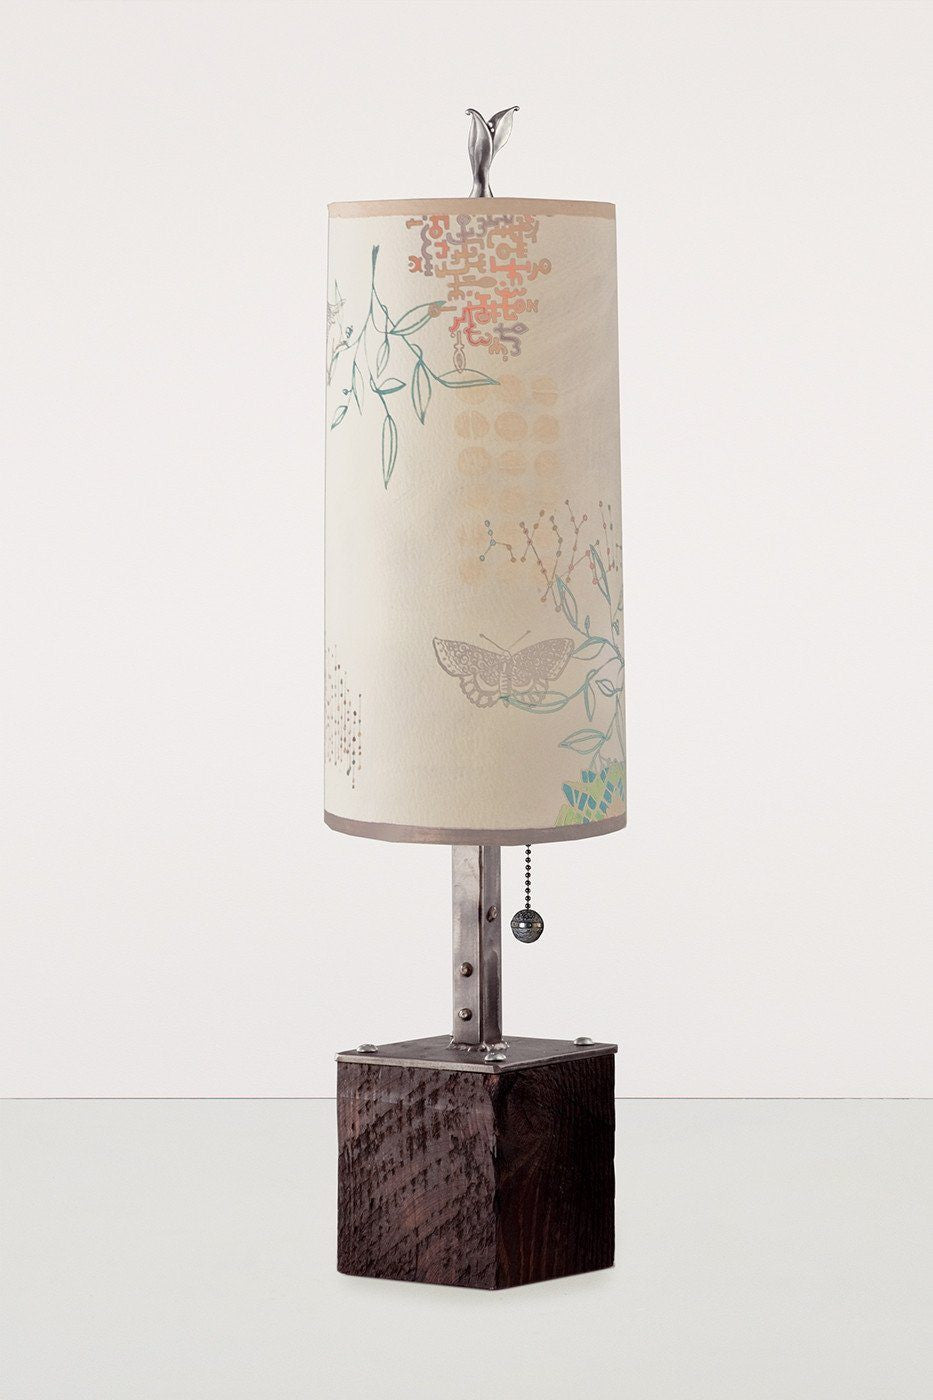 Janna Ugone & Co Table Lamps Steel Table Lamp on Reclaimed Wood with Small Tube Shade in Ecru Journey